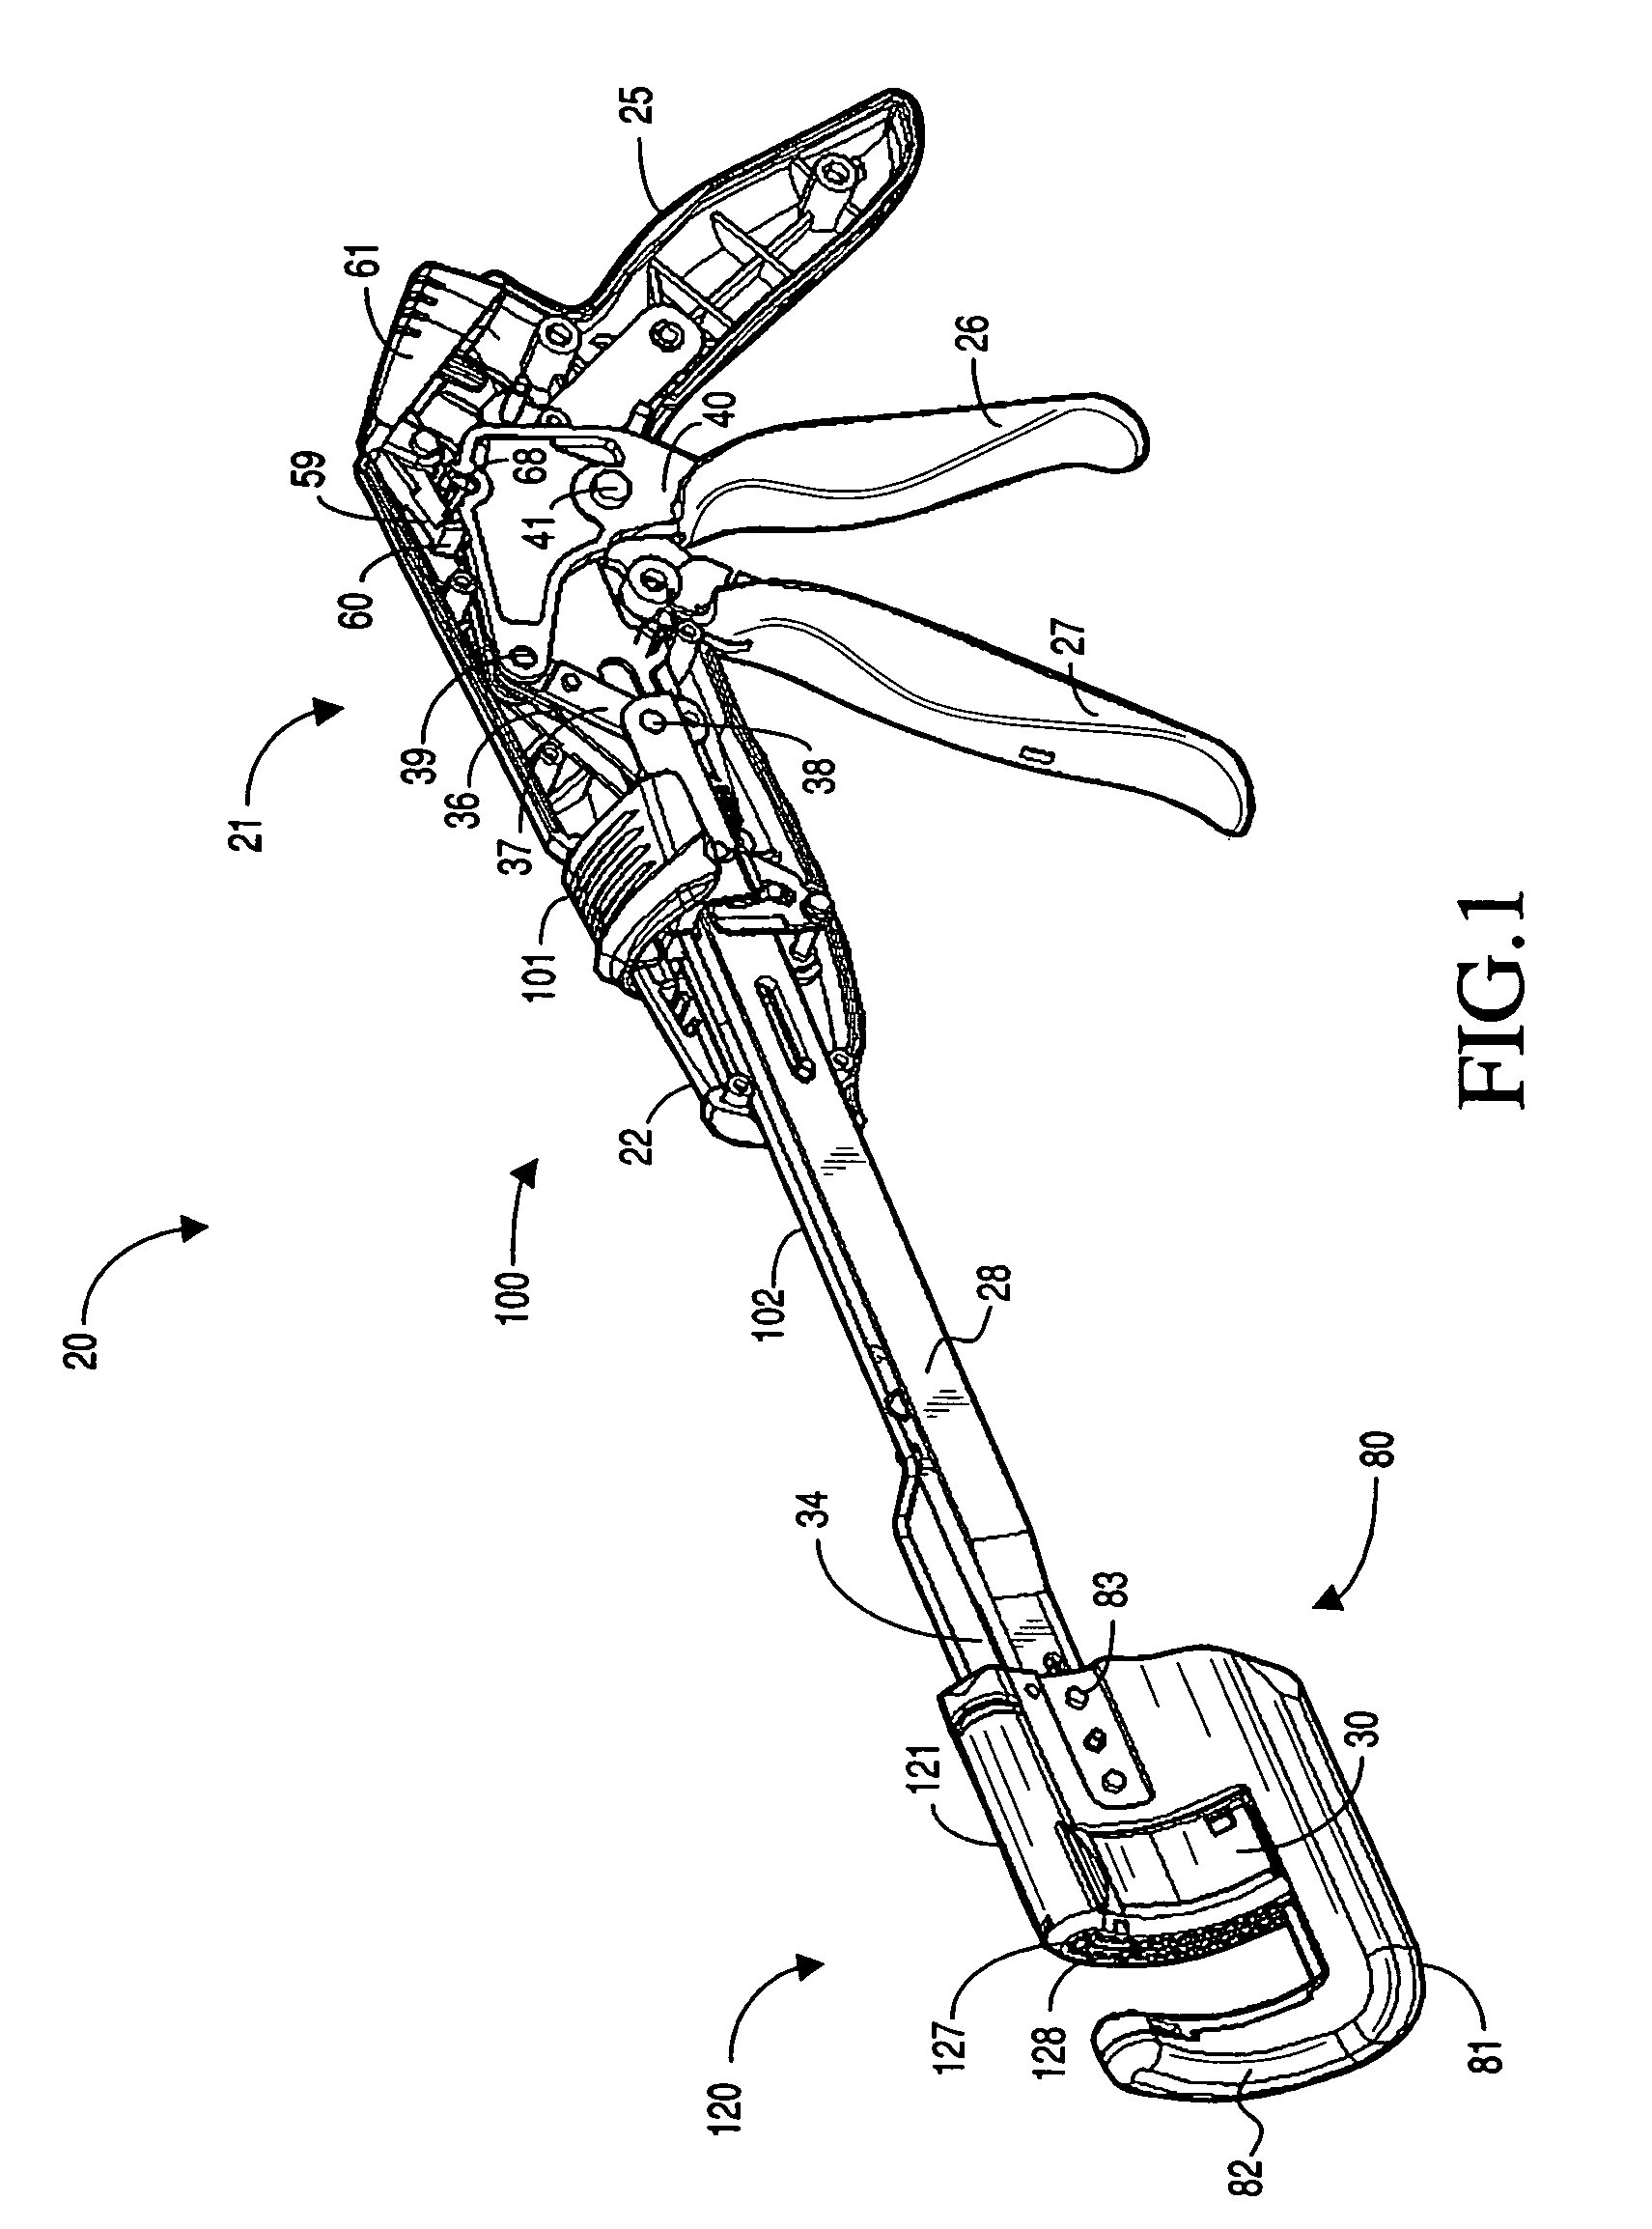 Retaining pin lever advancement mechanism for a curved cutter stapler